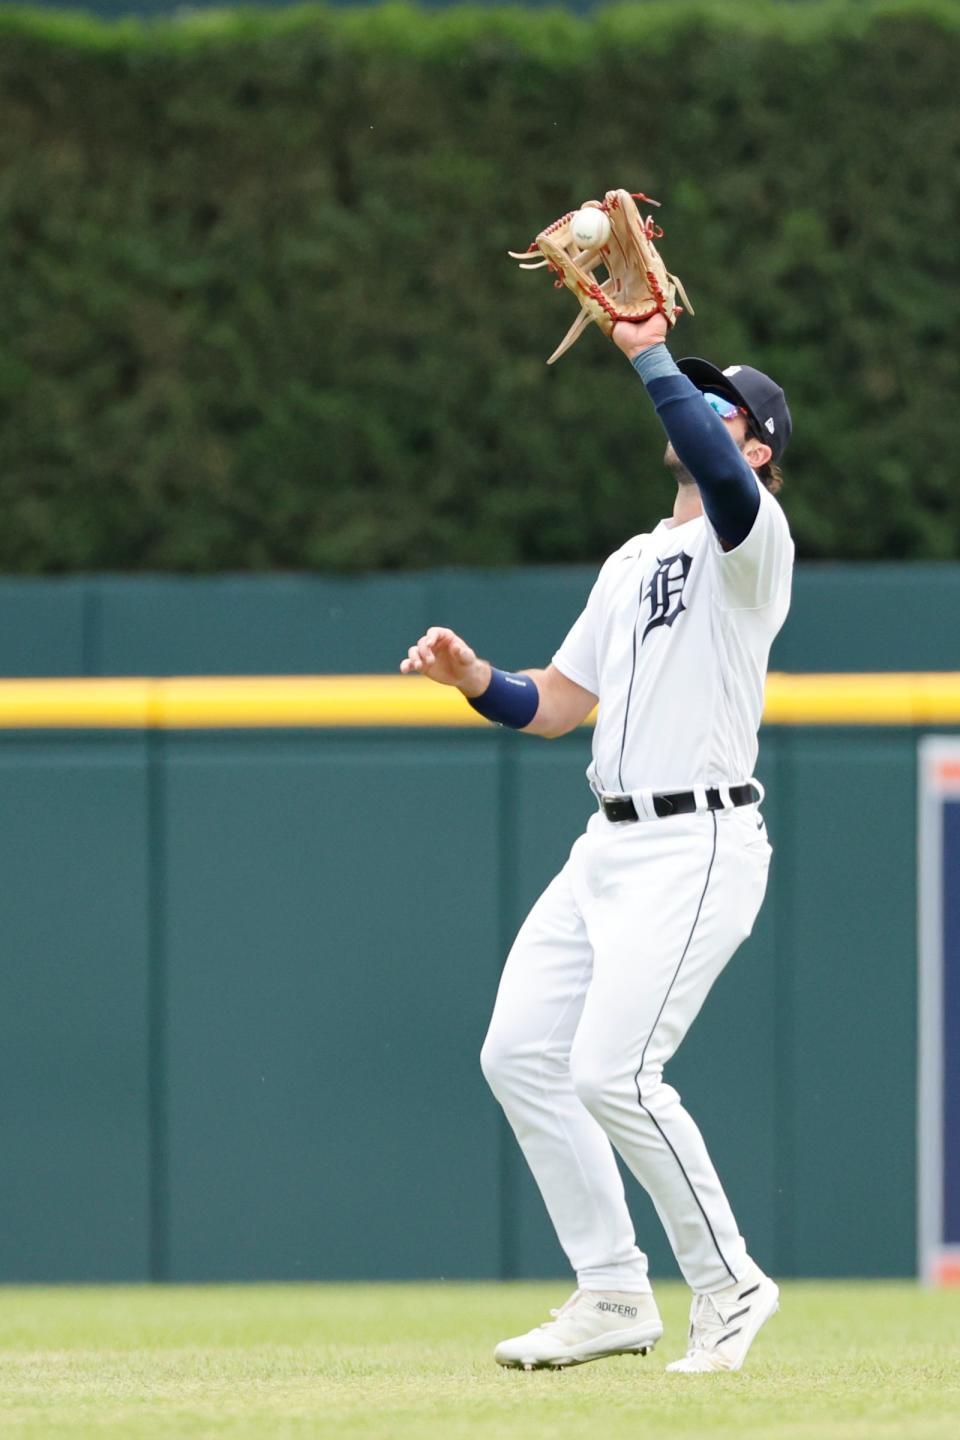 Tigers right fielder Matt Vierling makes a catch in the third inning of the Tigers' 5-0 loss to the Mariners on Saturday, May 13, 2023, at Comerica Park.